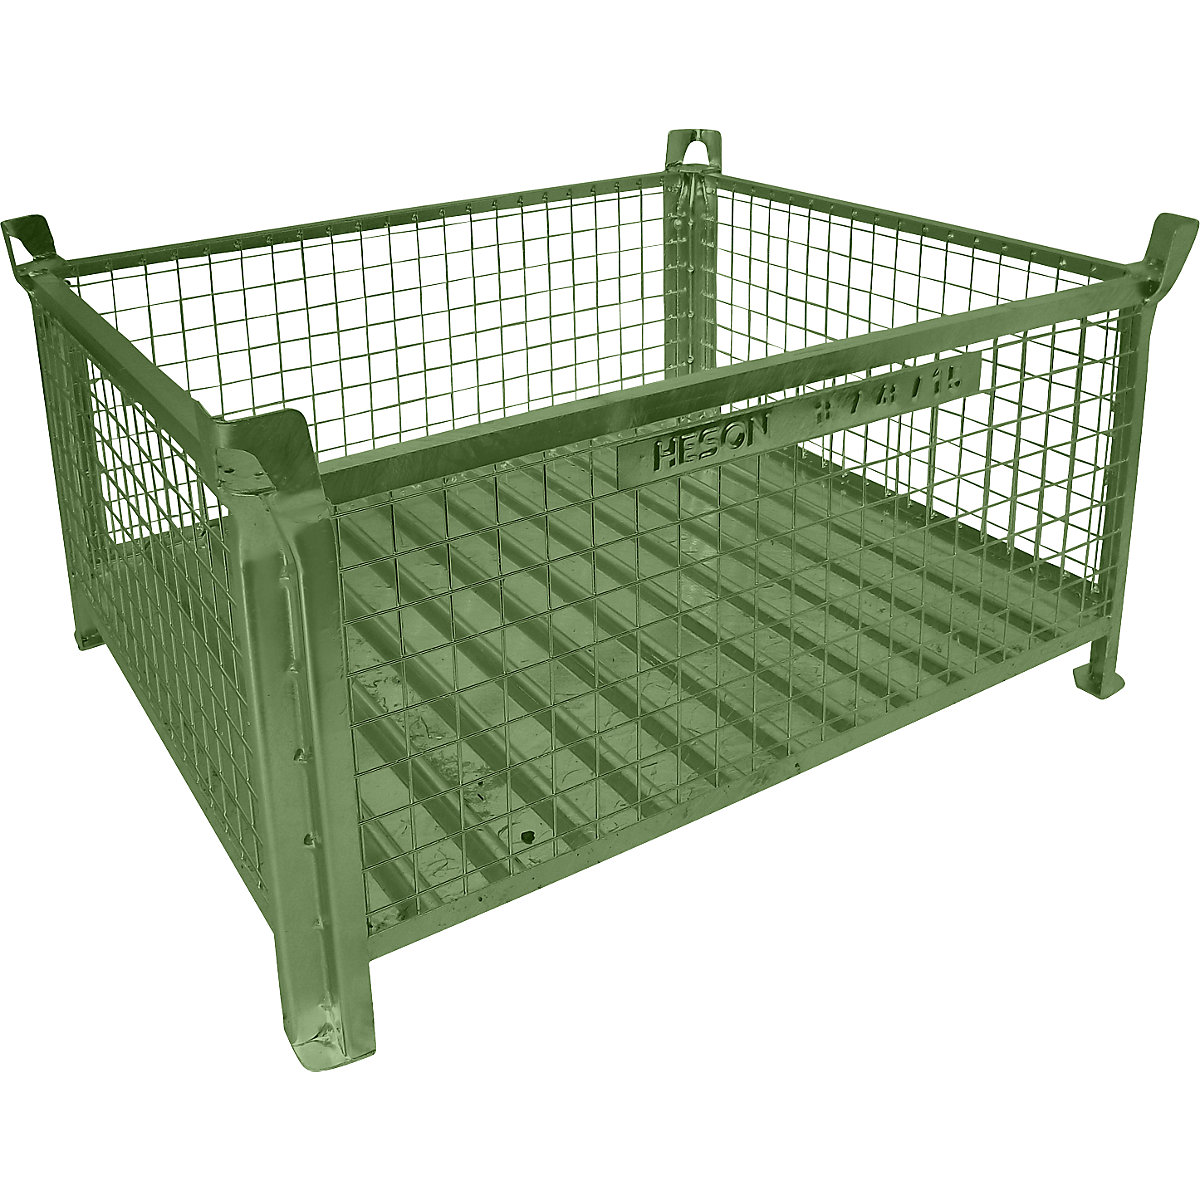 Box pallet with sheet steel base – Heson, LxW 1200 x 1000 mm, painted green-3